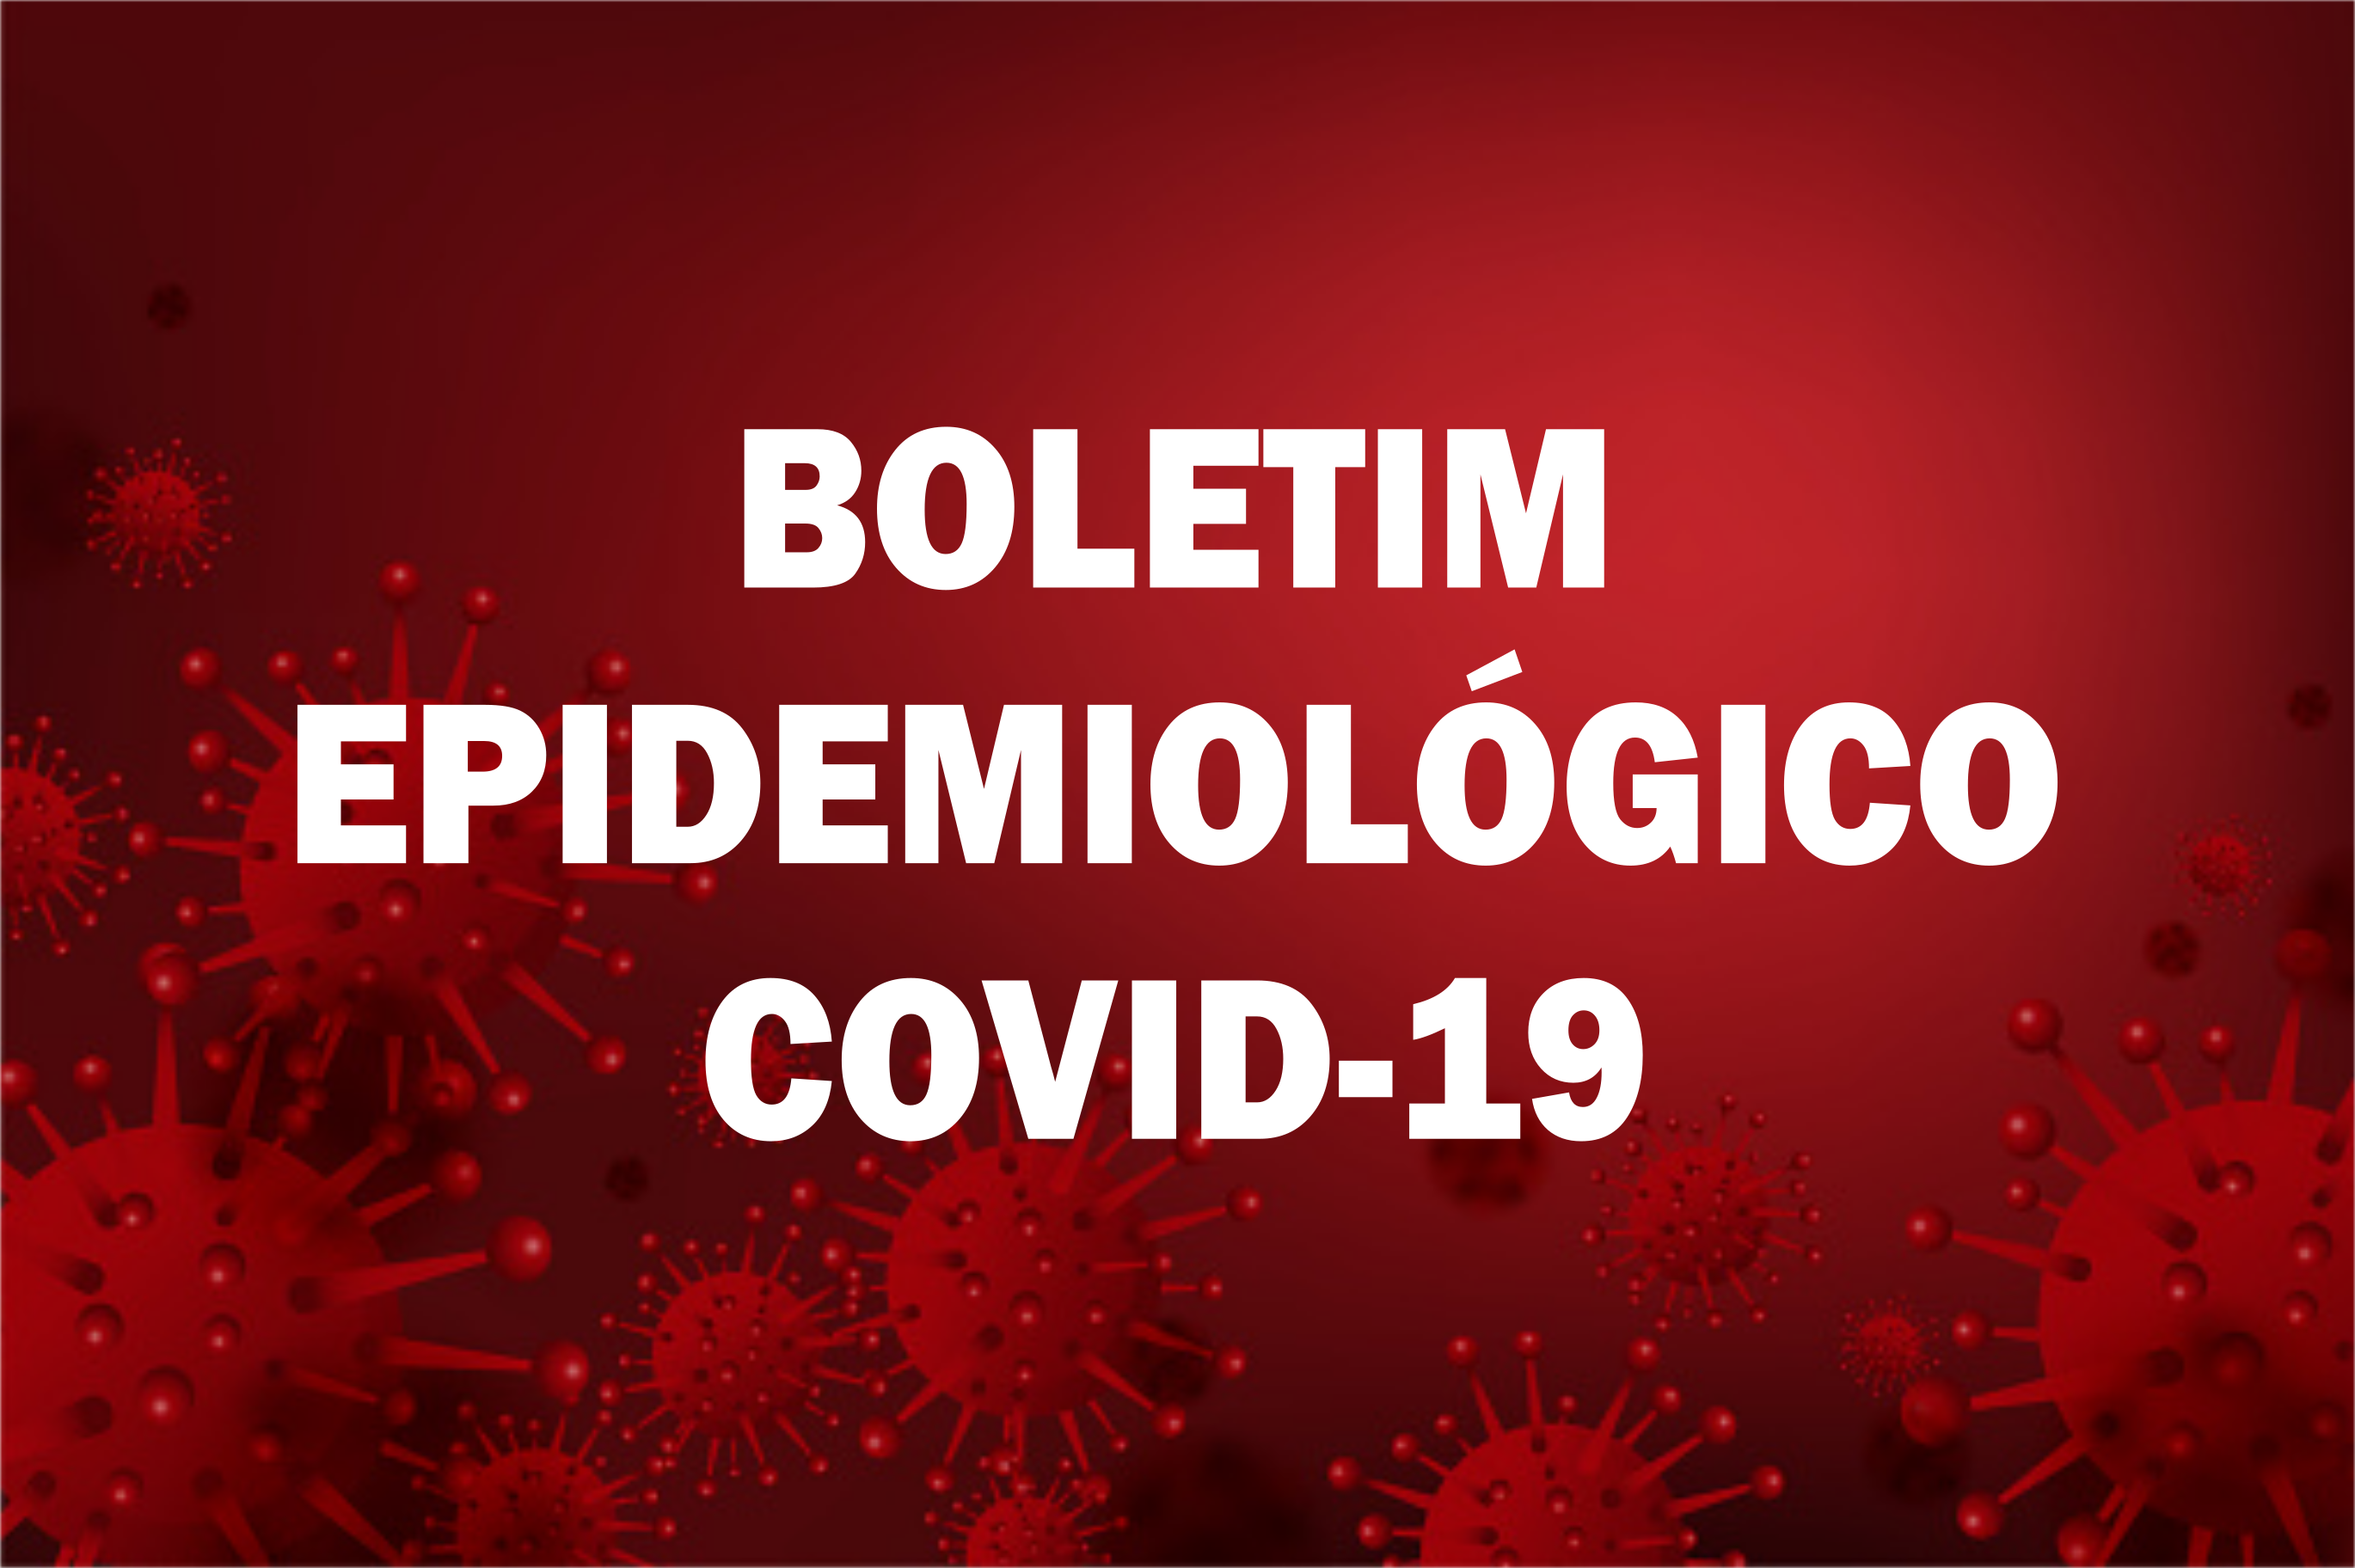 You are currently viewing BOLETIM EPIDEMIOLÓGICO Nº 138 (COVID-19)